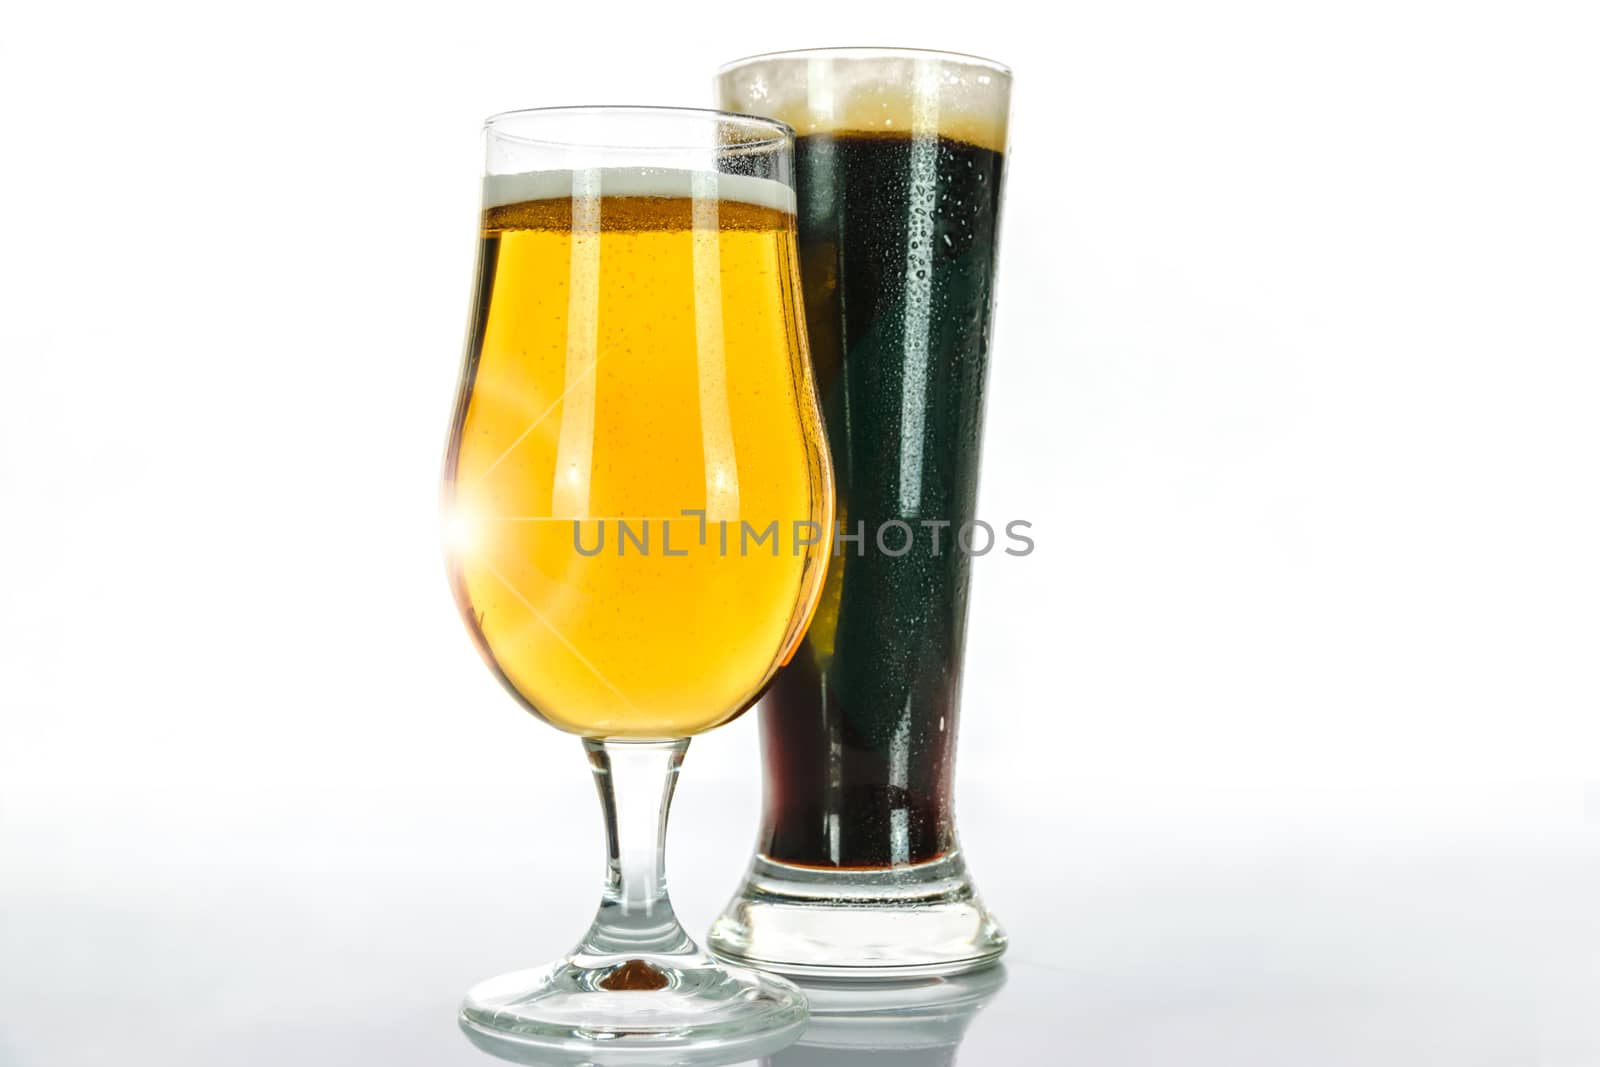 Light beer and dark beer in two glasses on a white background